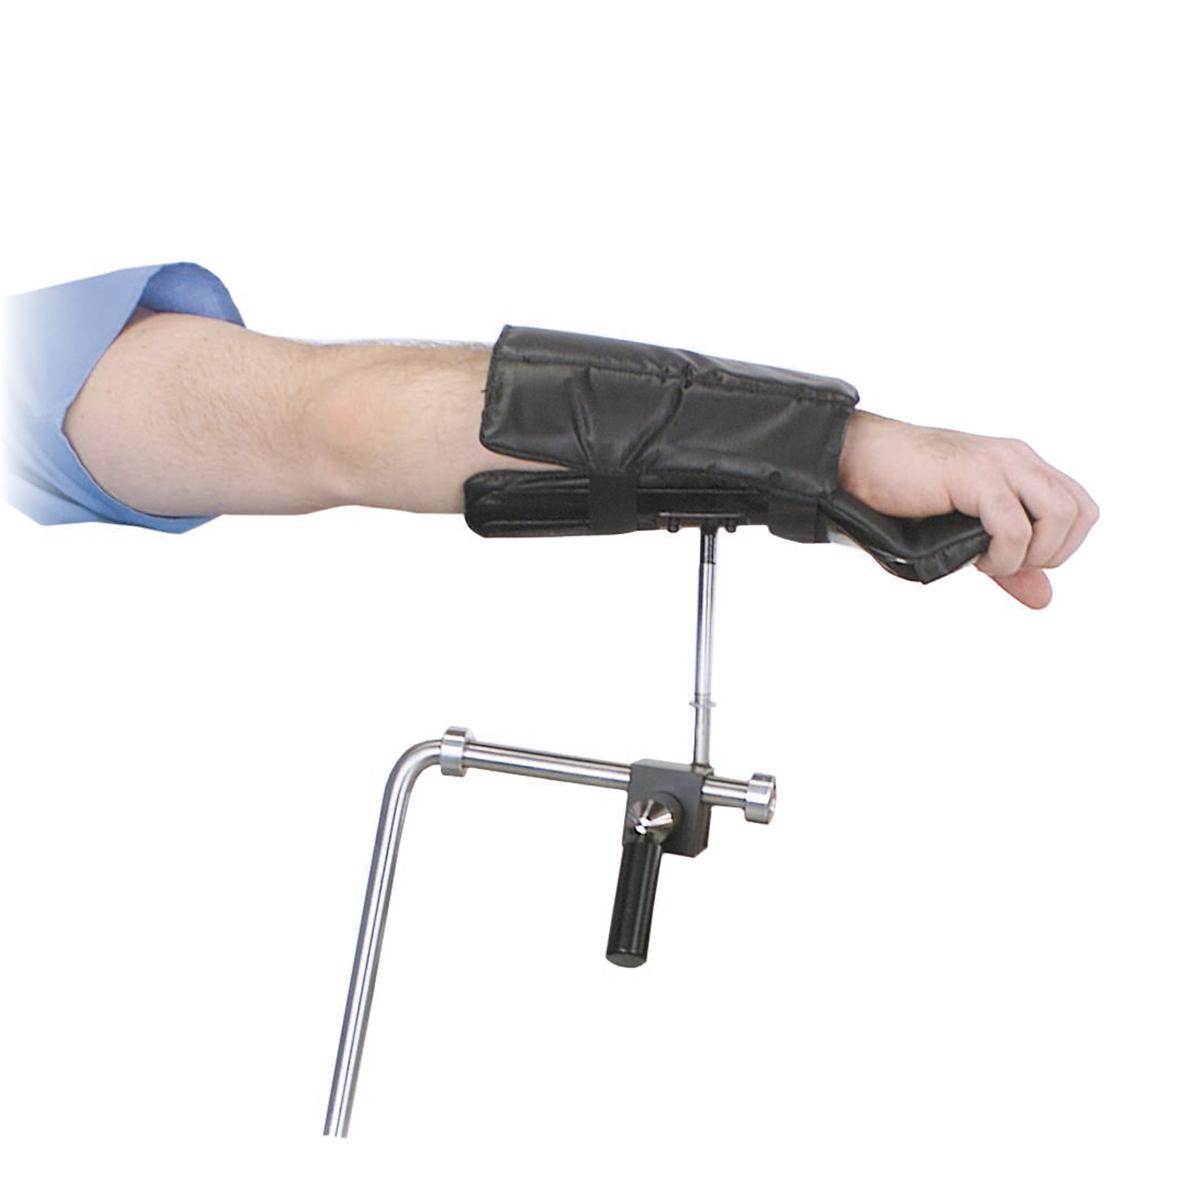 Surgical arm holder with patient hand in place